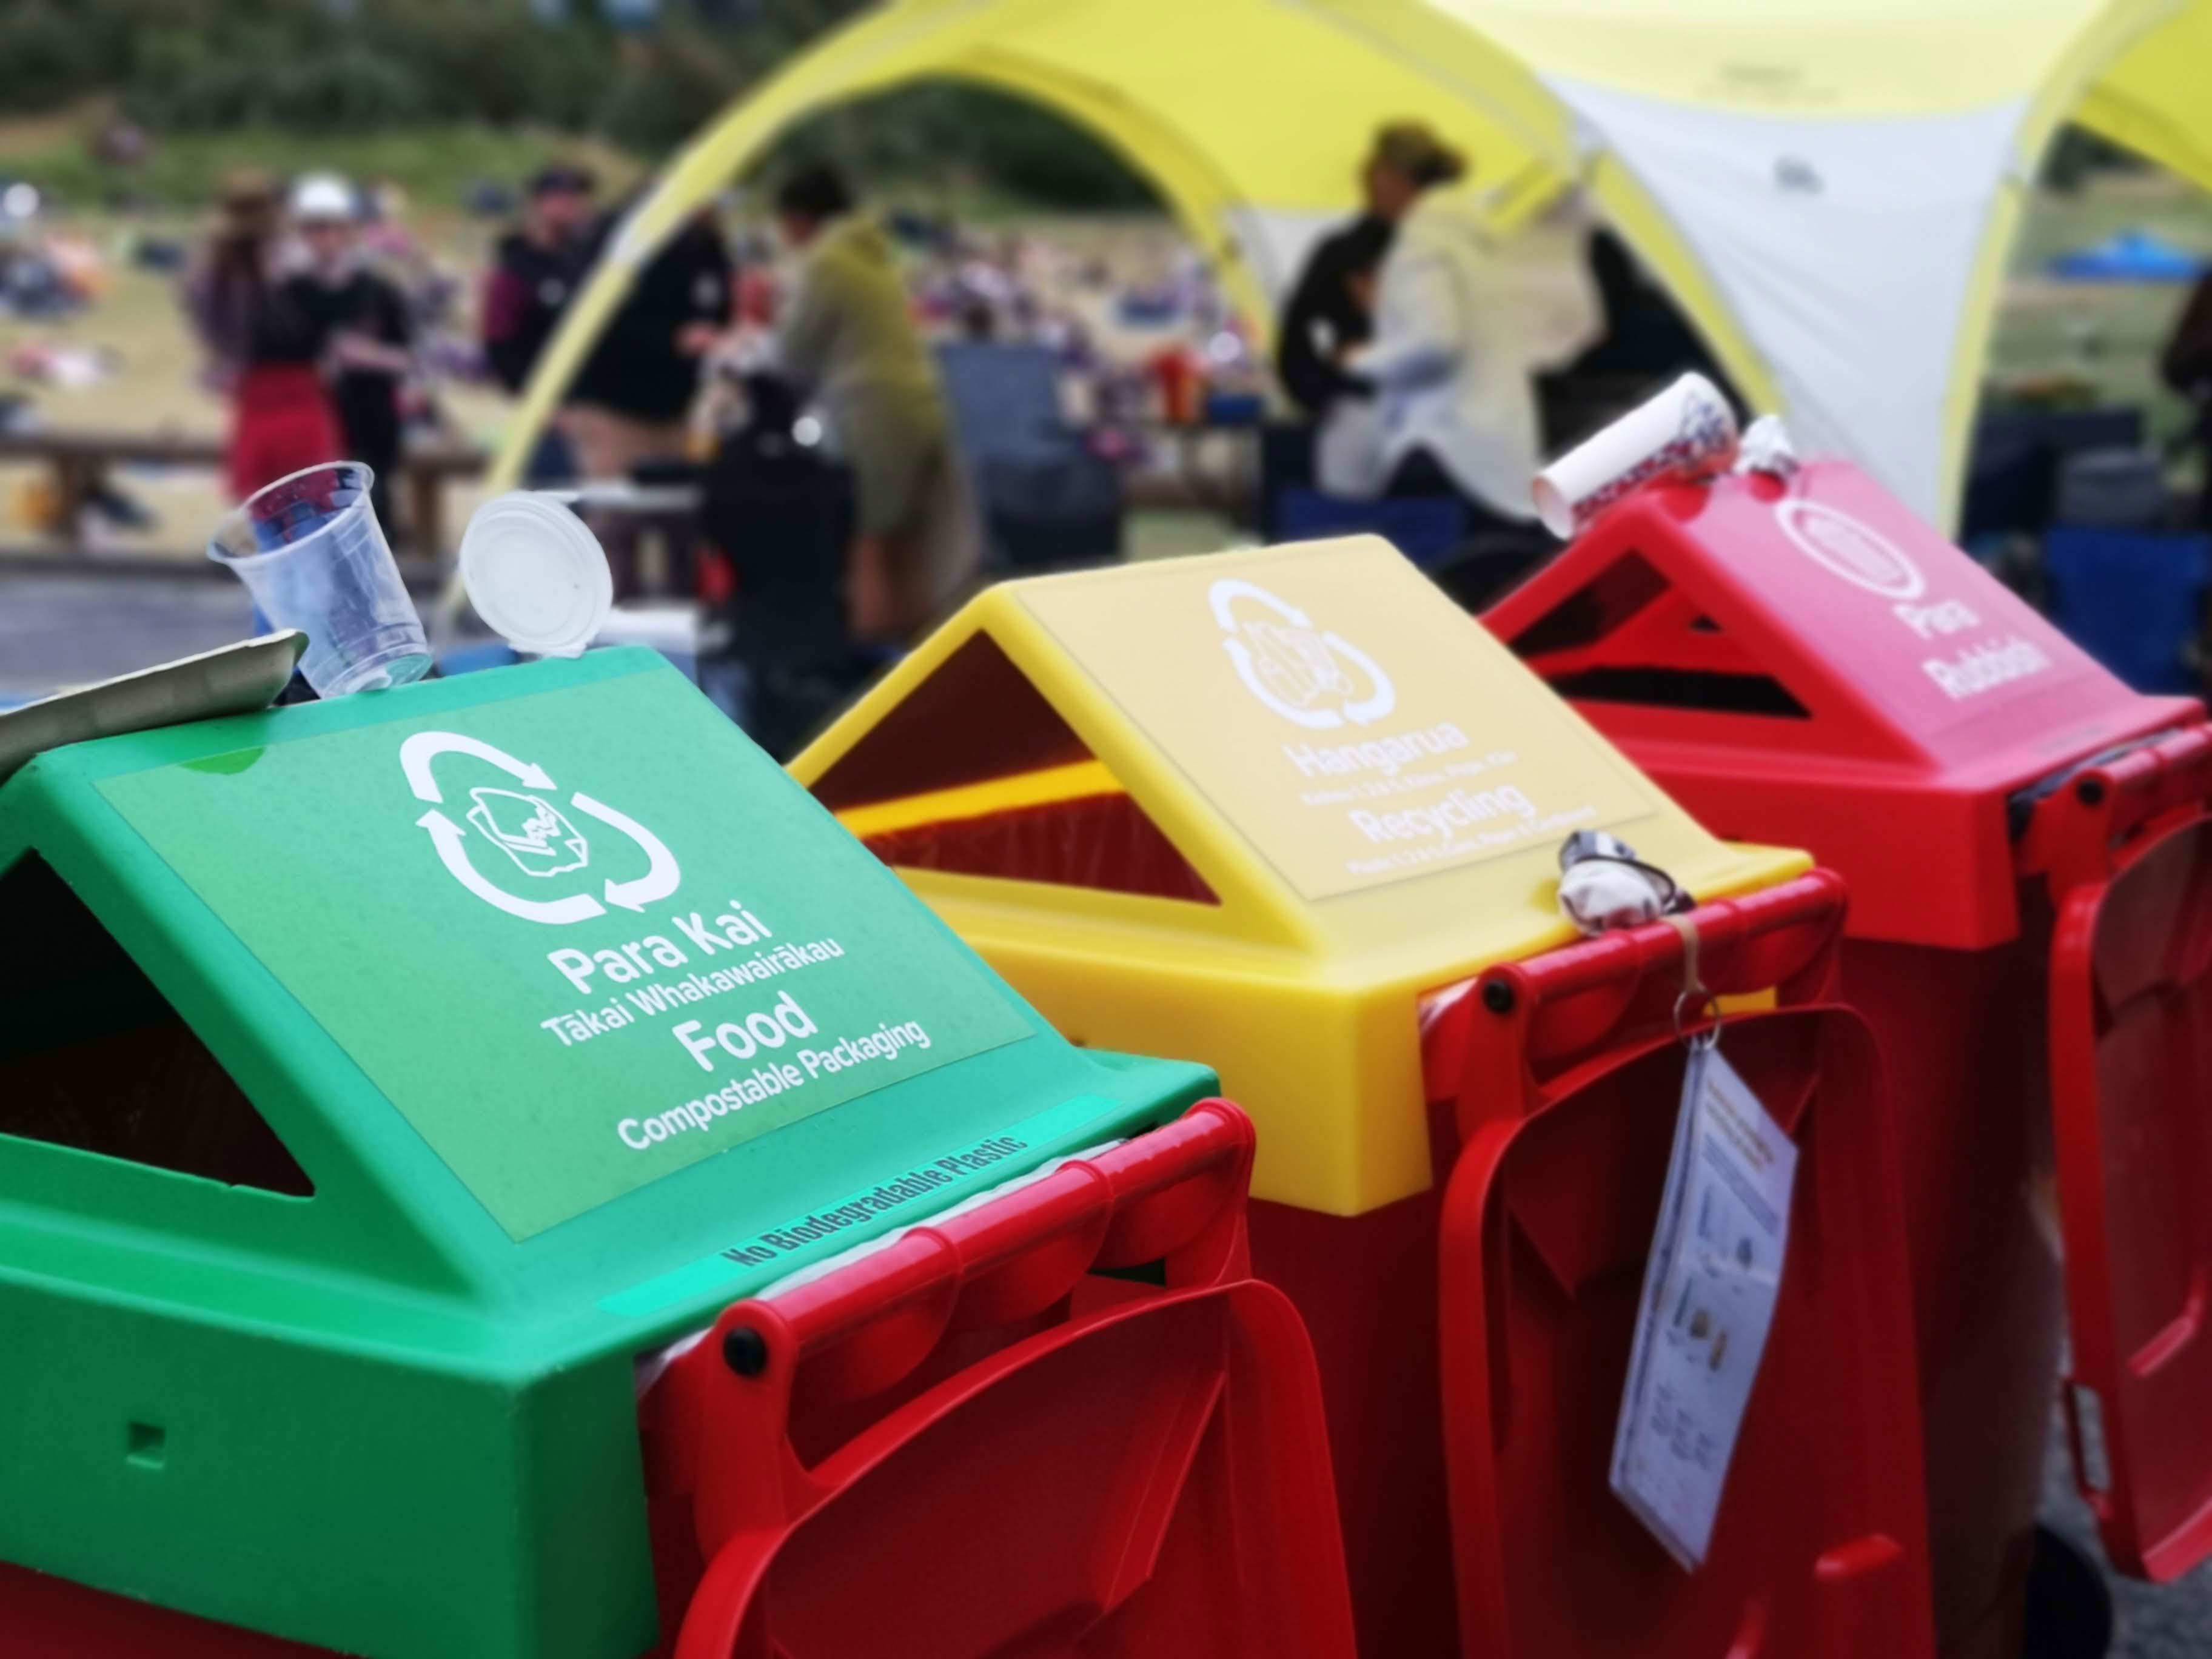 Waste hoods in use at Movies in the Park 2021